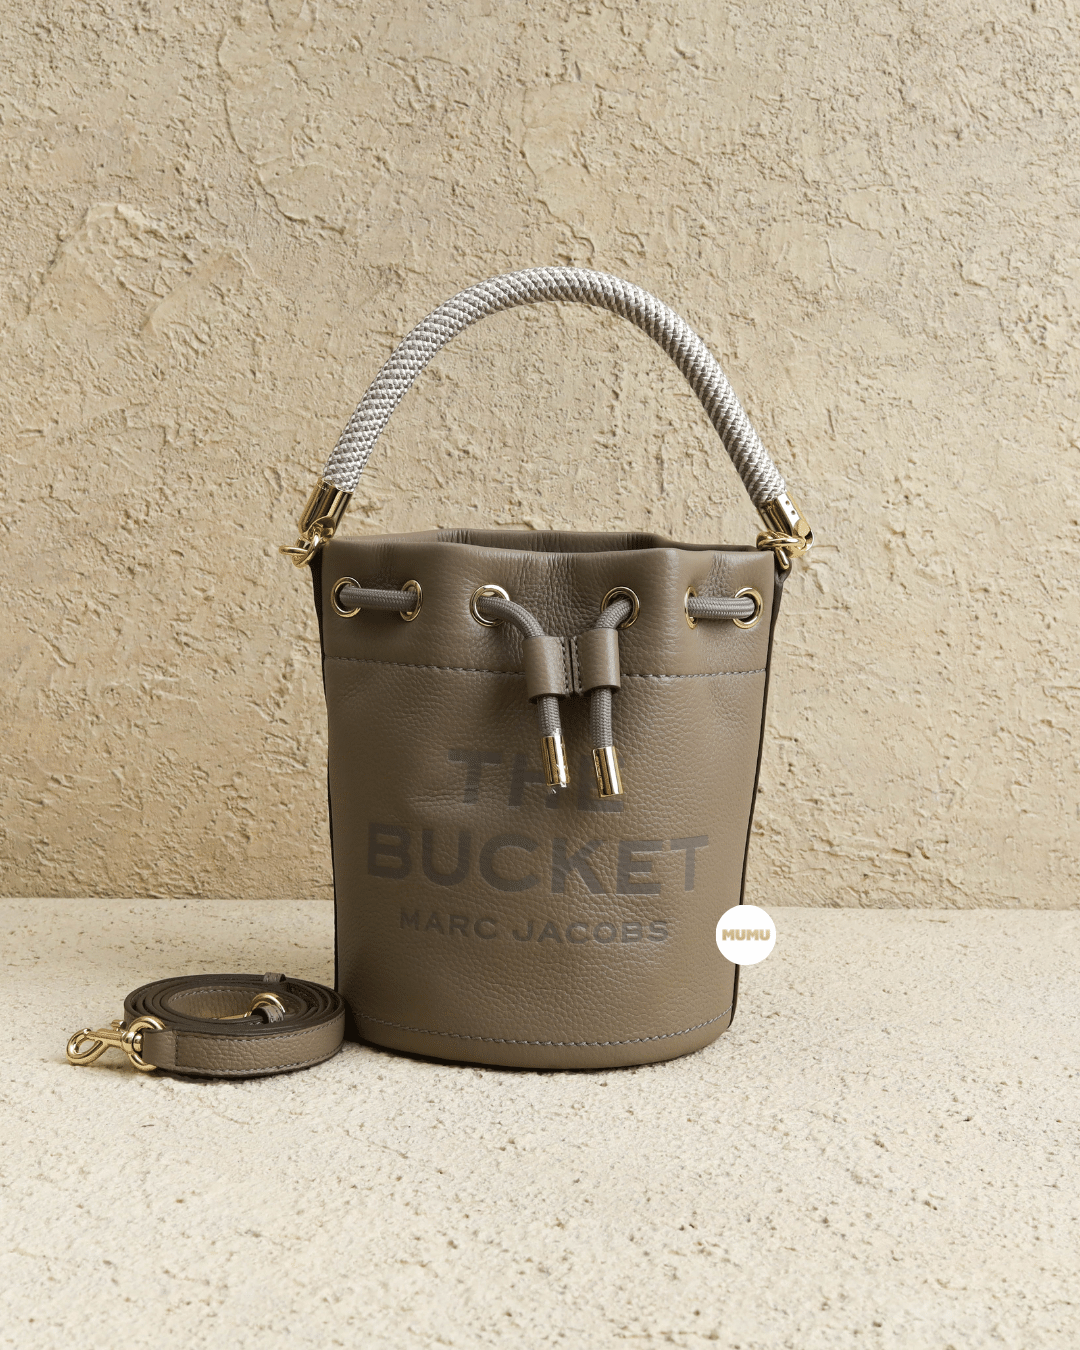 Marc Jacobs The Leather Bucket Bag Cement, Bucket Bag